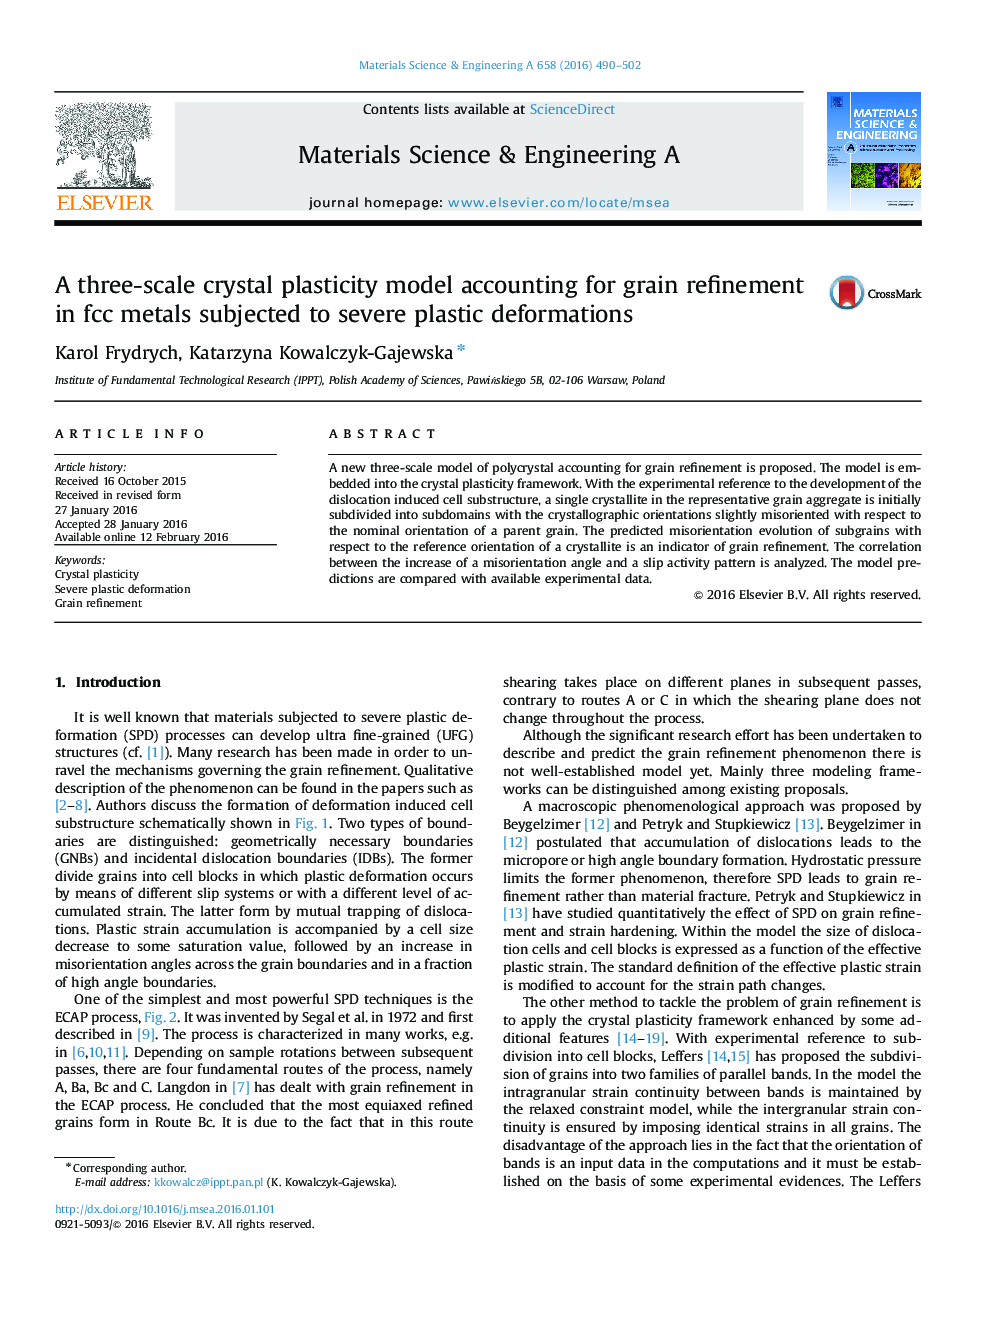 A three-scale crystal plasticity model accounting for grain refinement in fcc metals subjected to severe plastic deformations